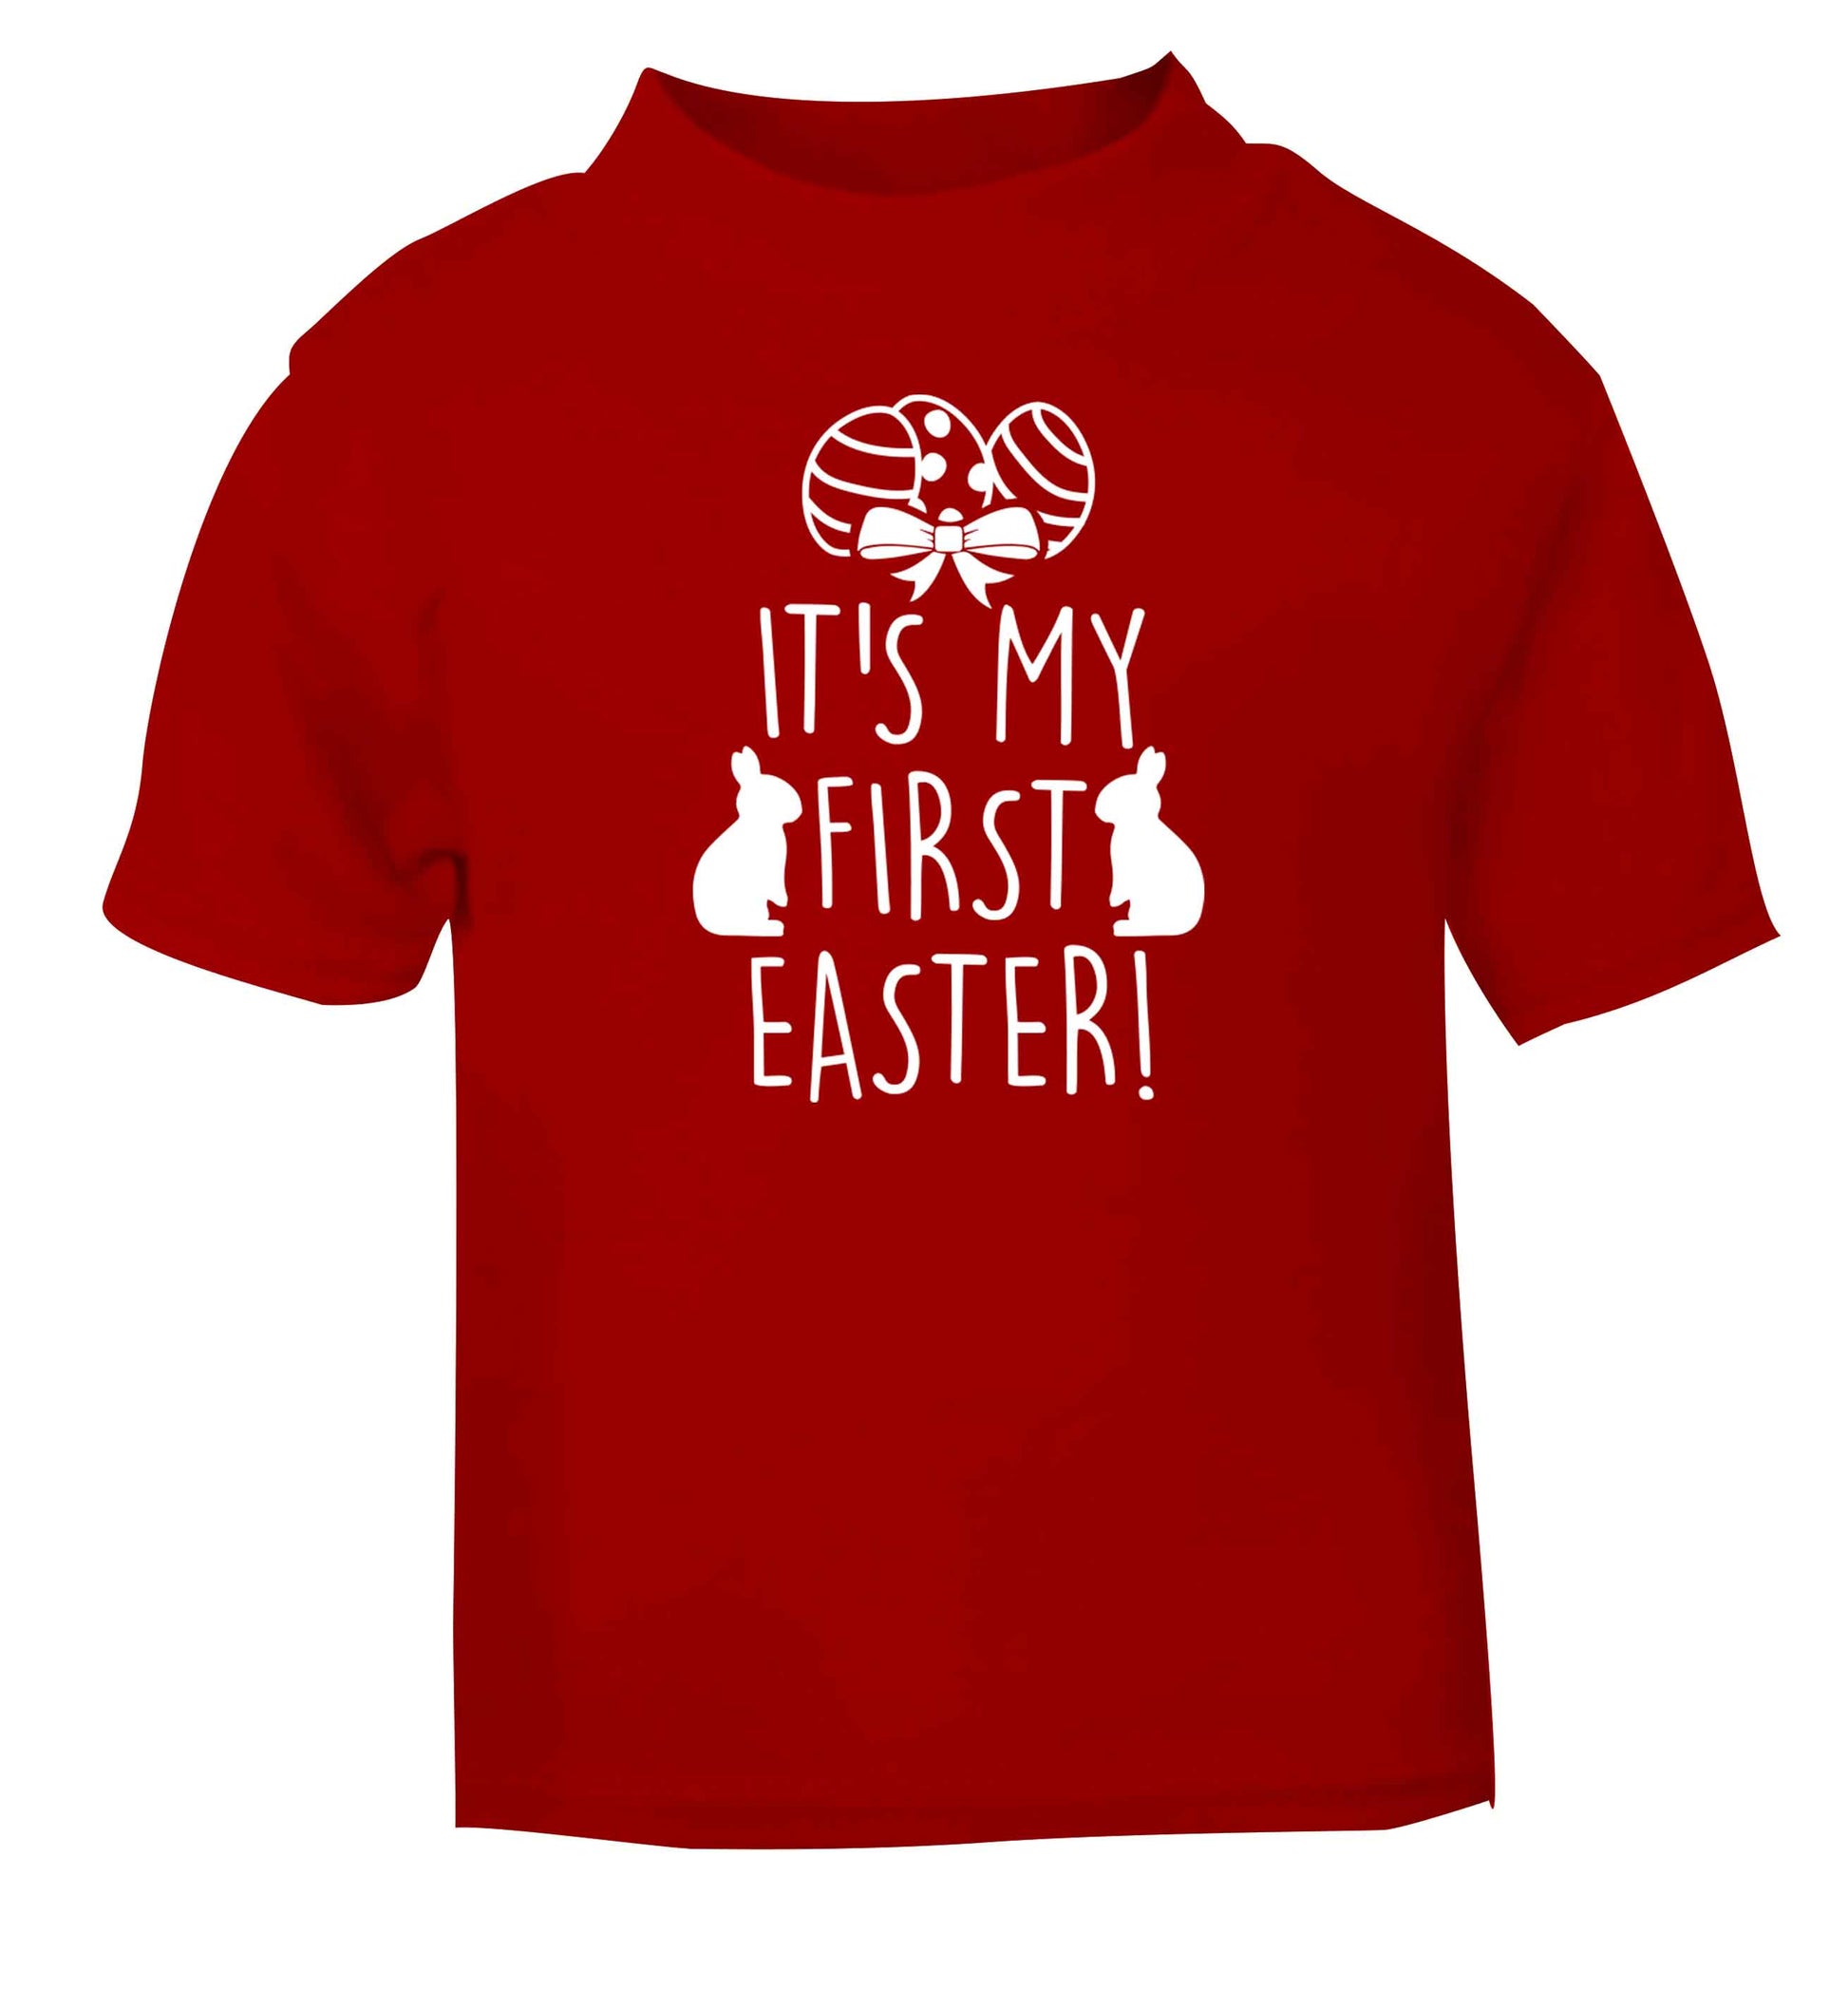 It's my first Easter red baby toddler Tshirt 2 Years